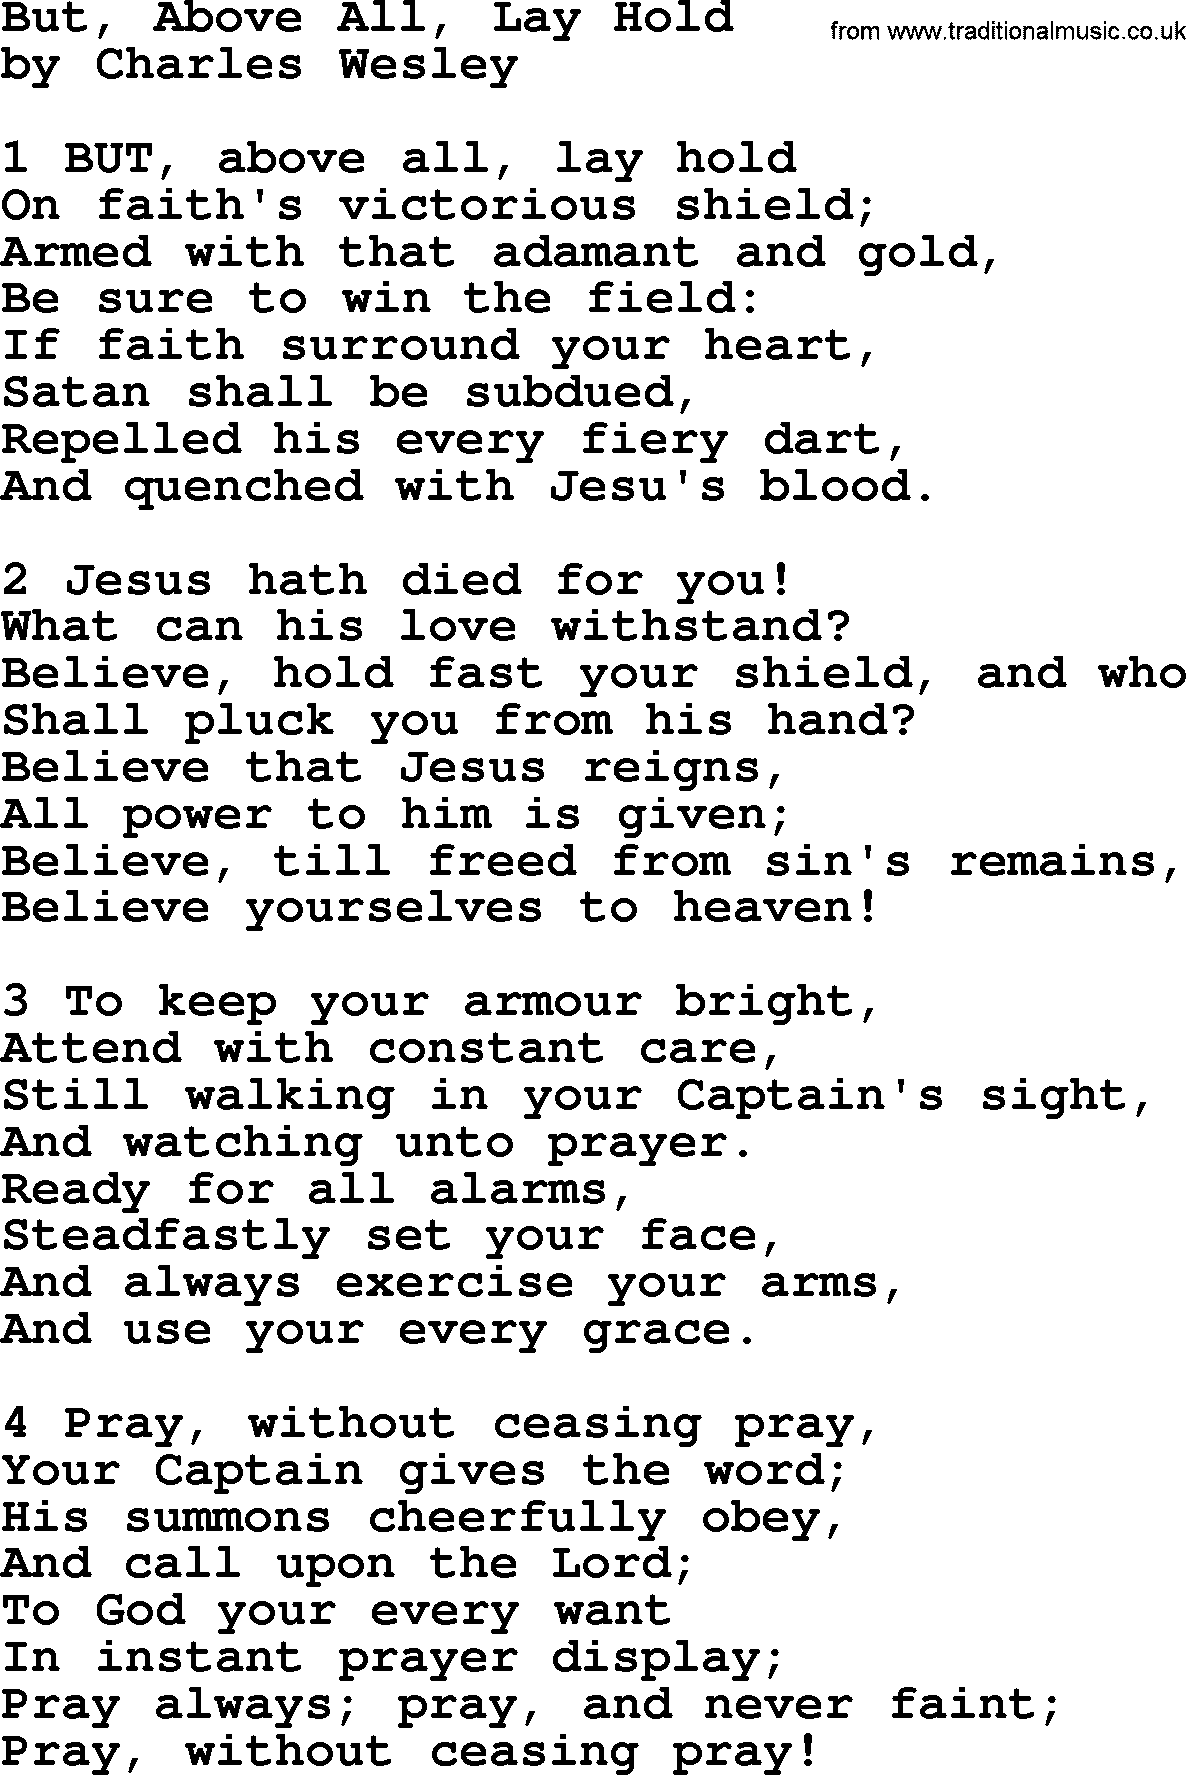 Charles Wesley hymn: But, Above All, Lay Hold, lyrics